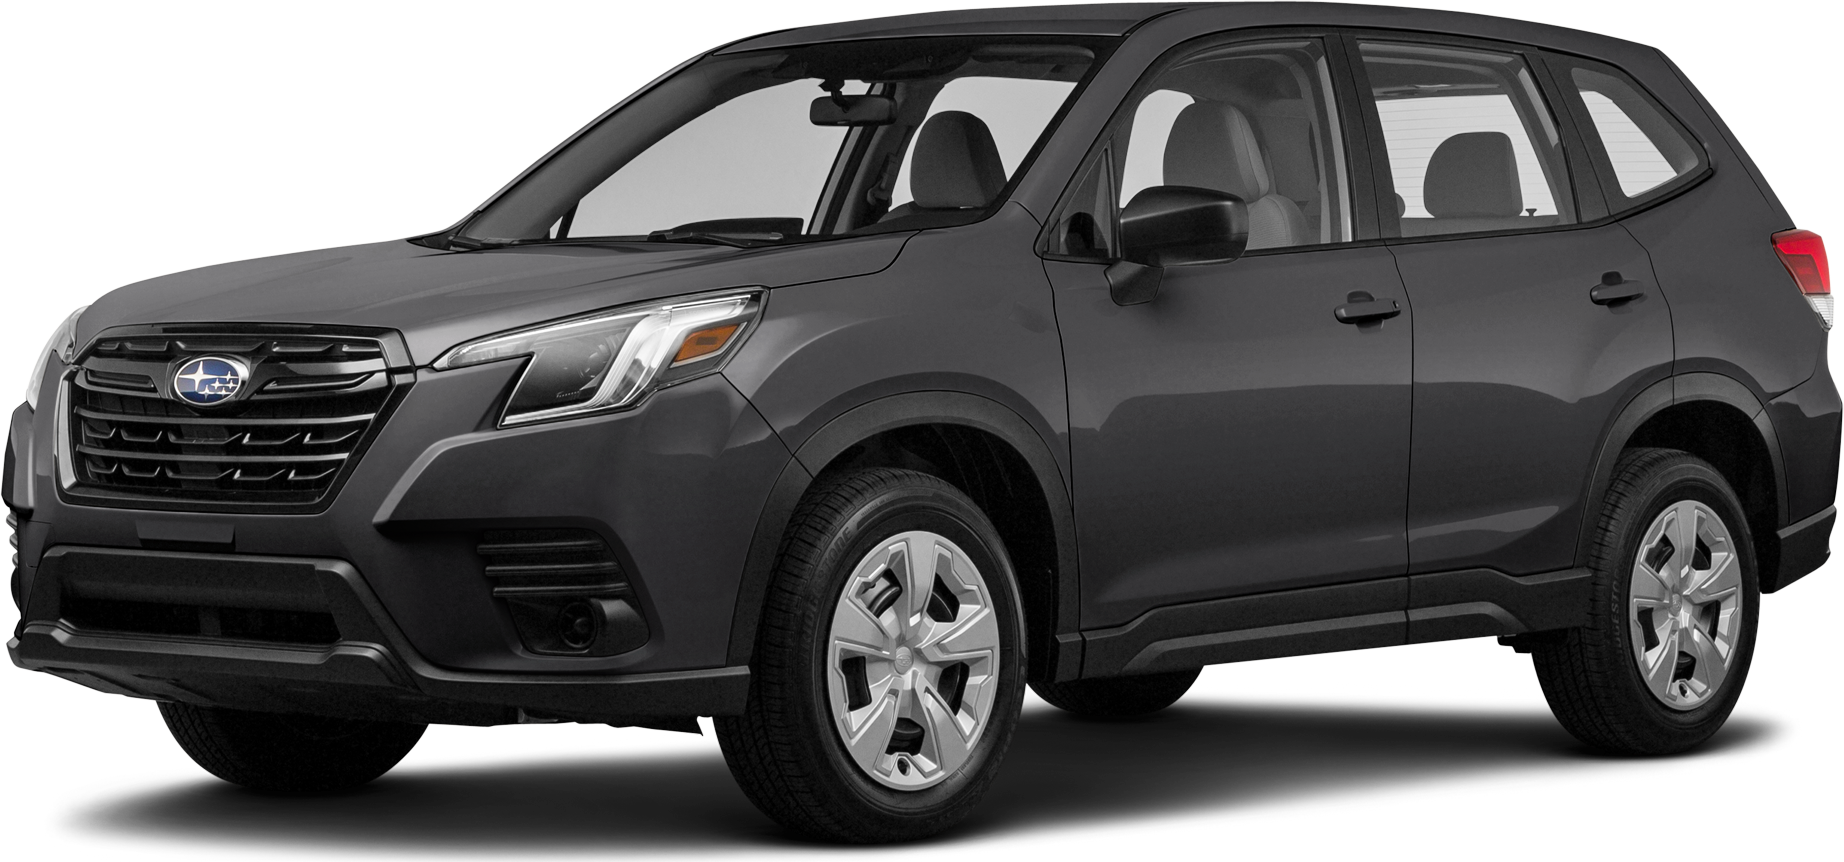 https://file.kelleybluebookimages.com/kbb/base/evox/CP/15136/2023-Subaru-Forester-front_15136_032_1844x862_P8Y_cropped.png